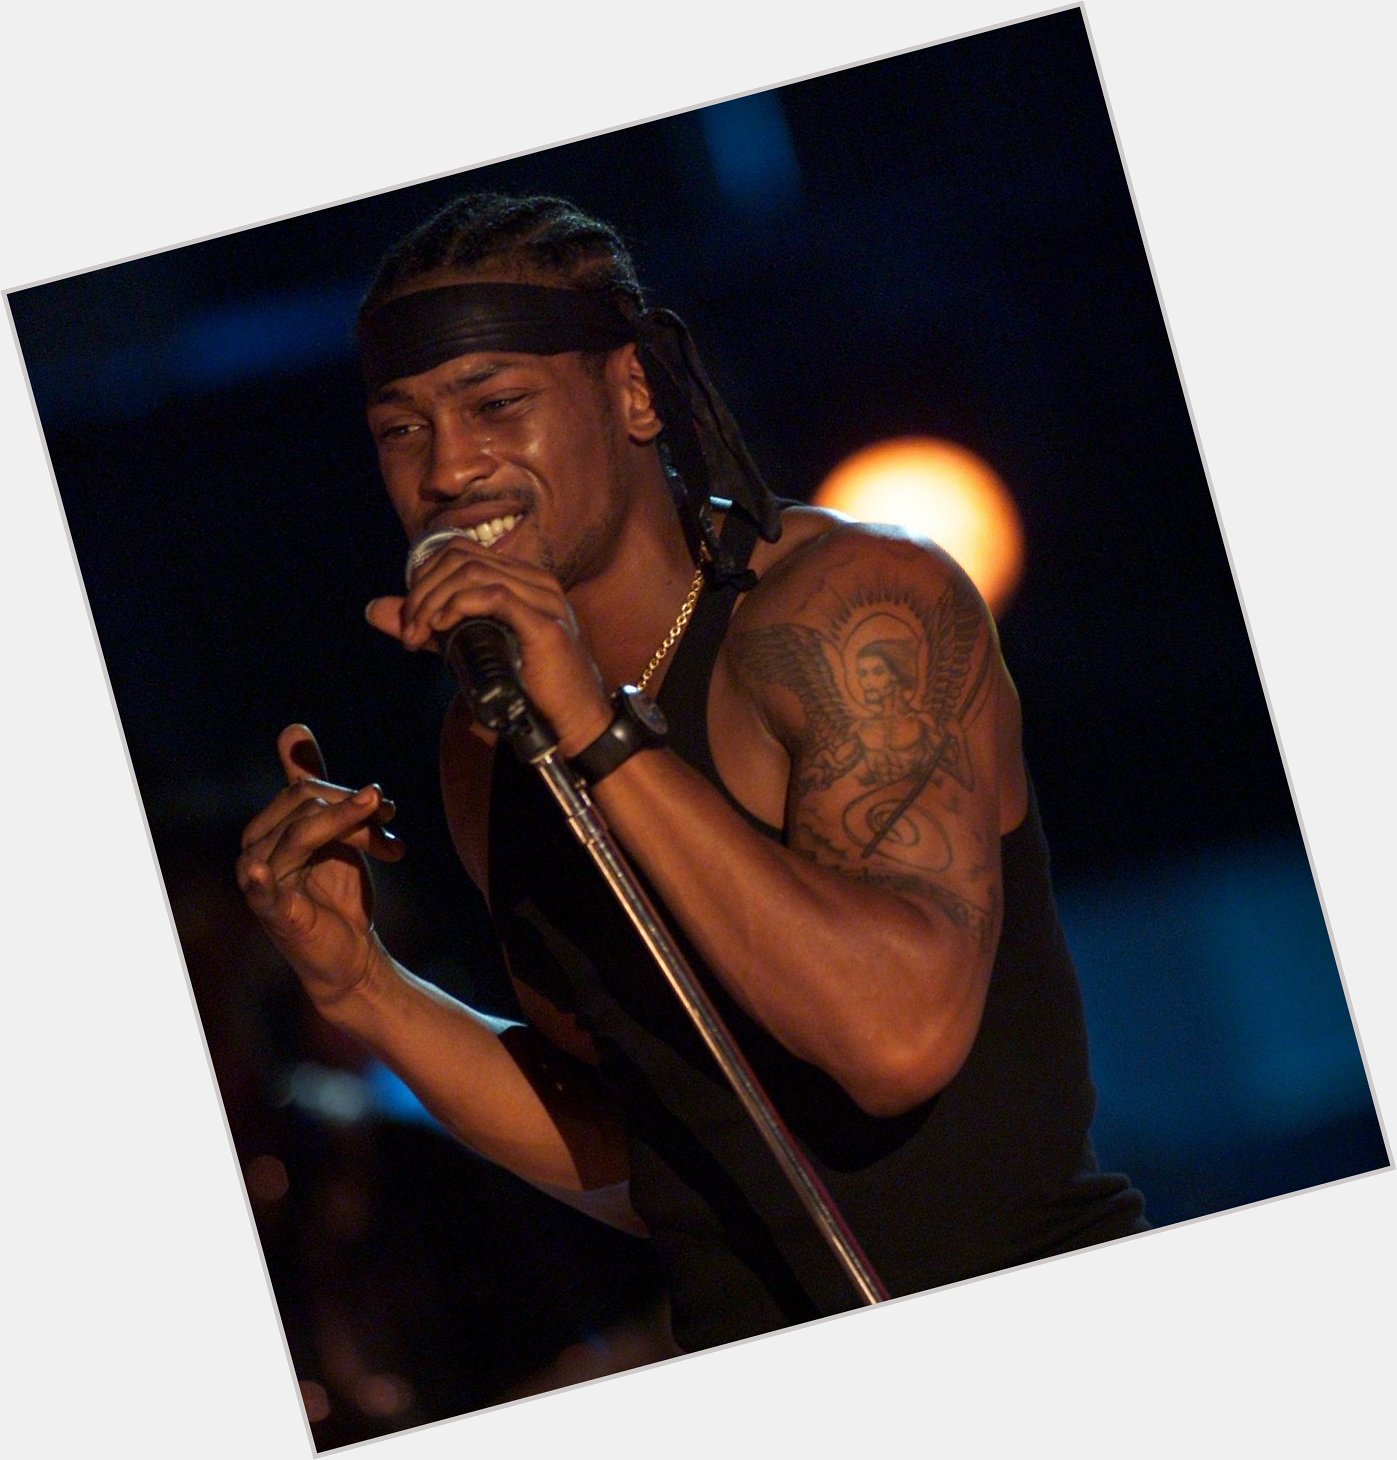 Happy birthday D\angelo! Tune into today to celebrate with music video blocks at 2:04pm and 10:05pm EST! 